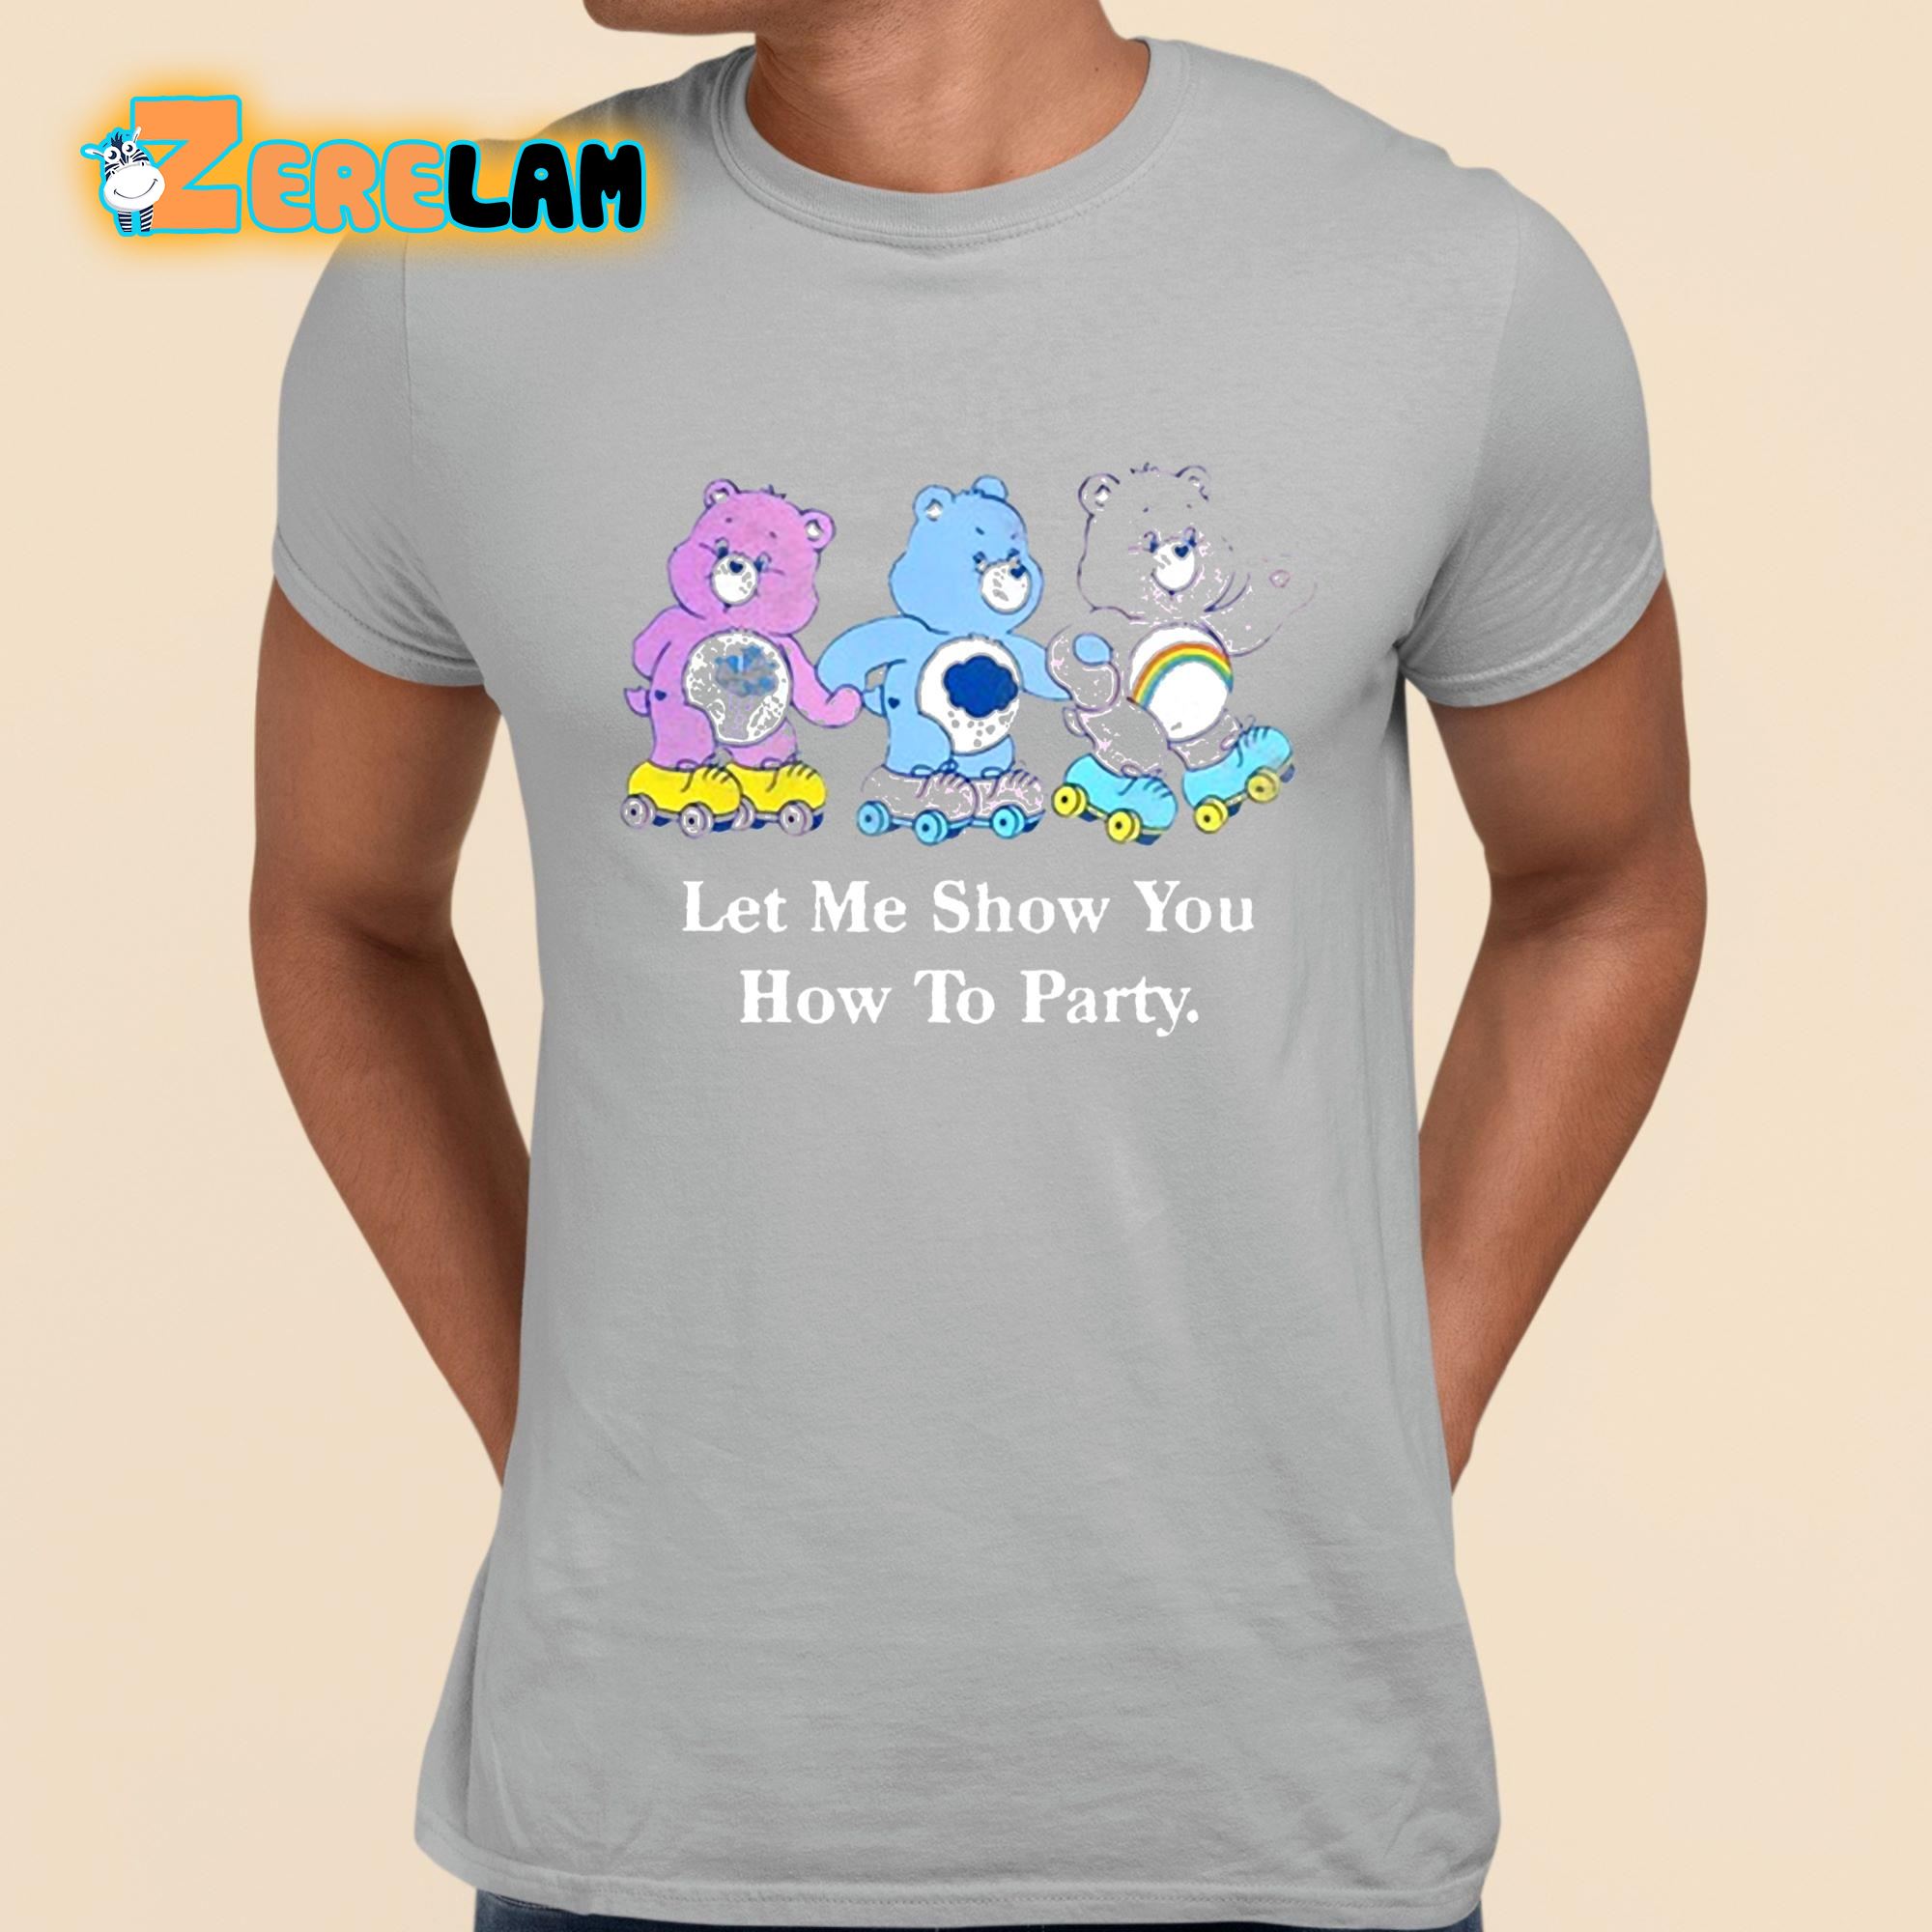 Let Me Show You How To Party Shirt grey 1